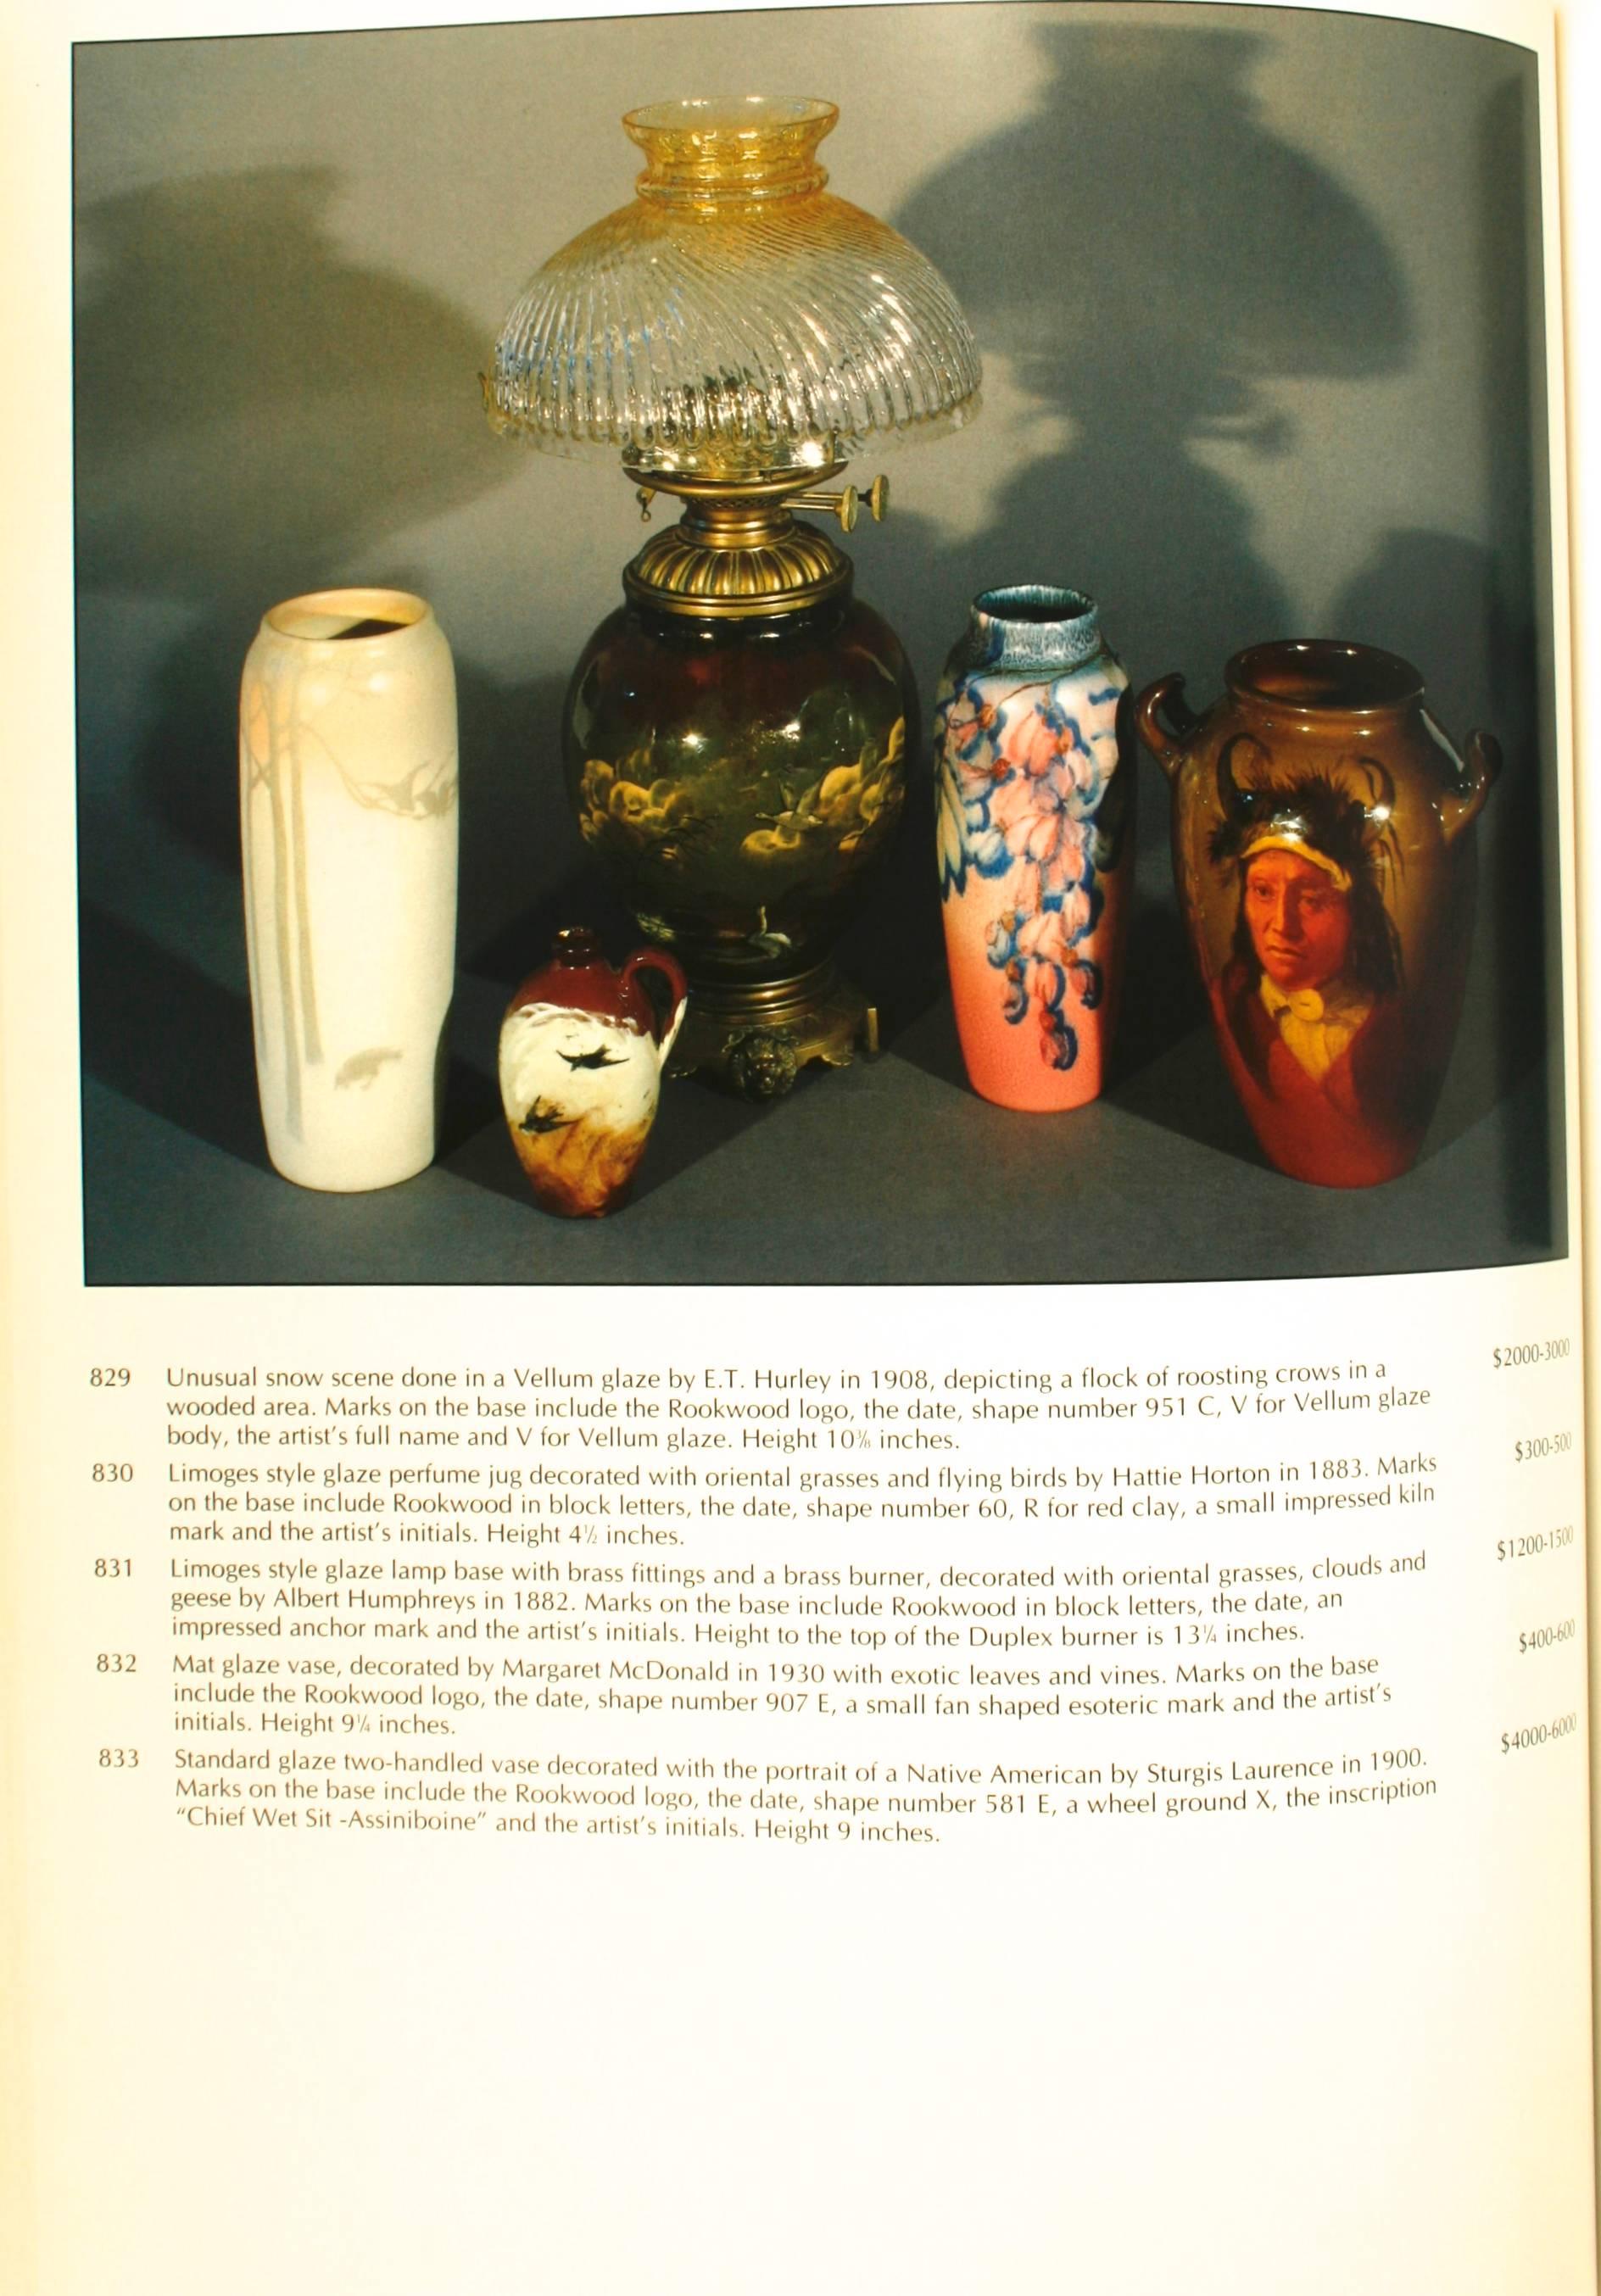 Glover Collection Rookwood Pottery by Cincinnati Art Galleries, 1st Ed For Sale 1